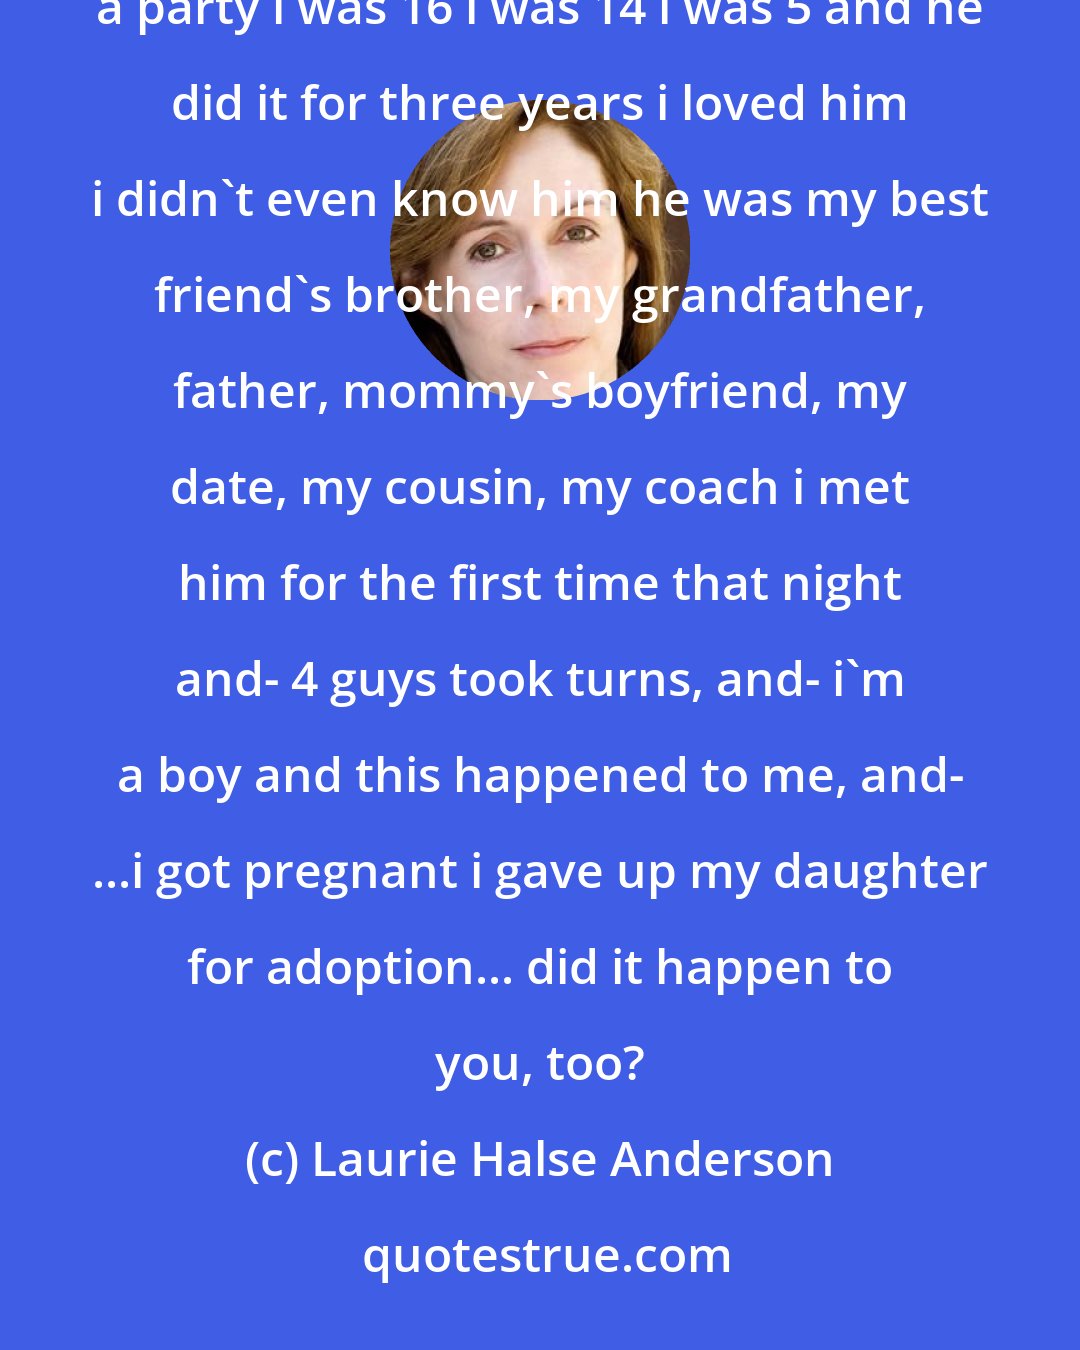 Laurie Halse Anderson: i was raped, too sexually assaulted in seventh grade, tenth grade. the summer after graduation, at a party i was 16 i was 14 i was 5 and he did it for three years i loved him i didn't even know him he was my best friend's brother, my grandfather, father, mommy's boyfriend, my date, my cousin, my coach i met him for the first time that night and- 4 guys took turns, and- i'm a boy and this happened to me, and- ...i got pregnant i gave up my daughter for adoption... did it happen to you, too?